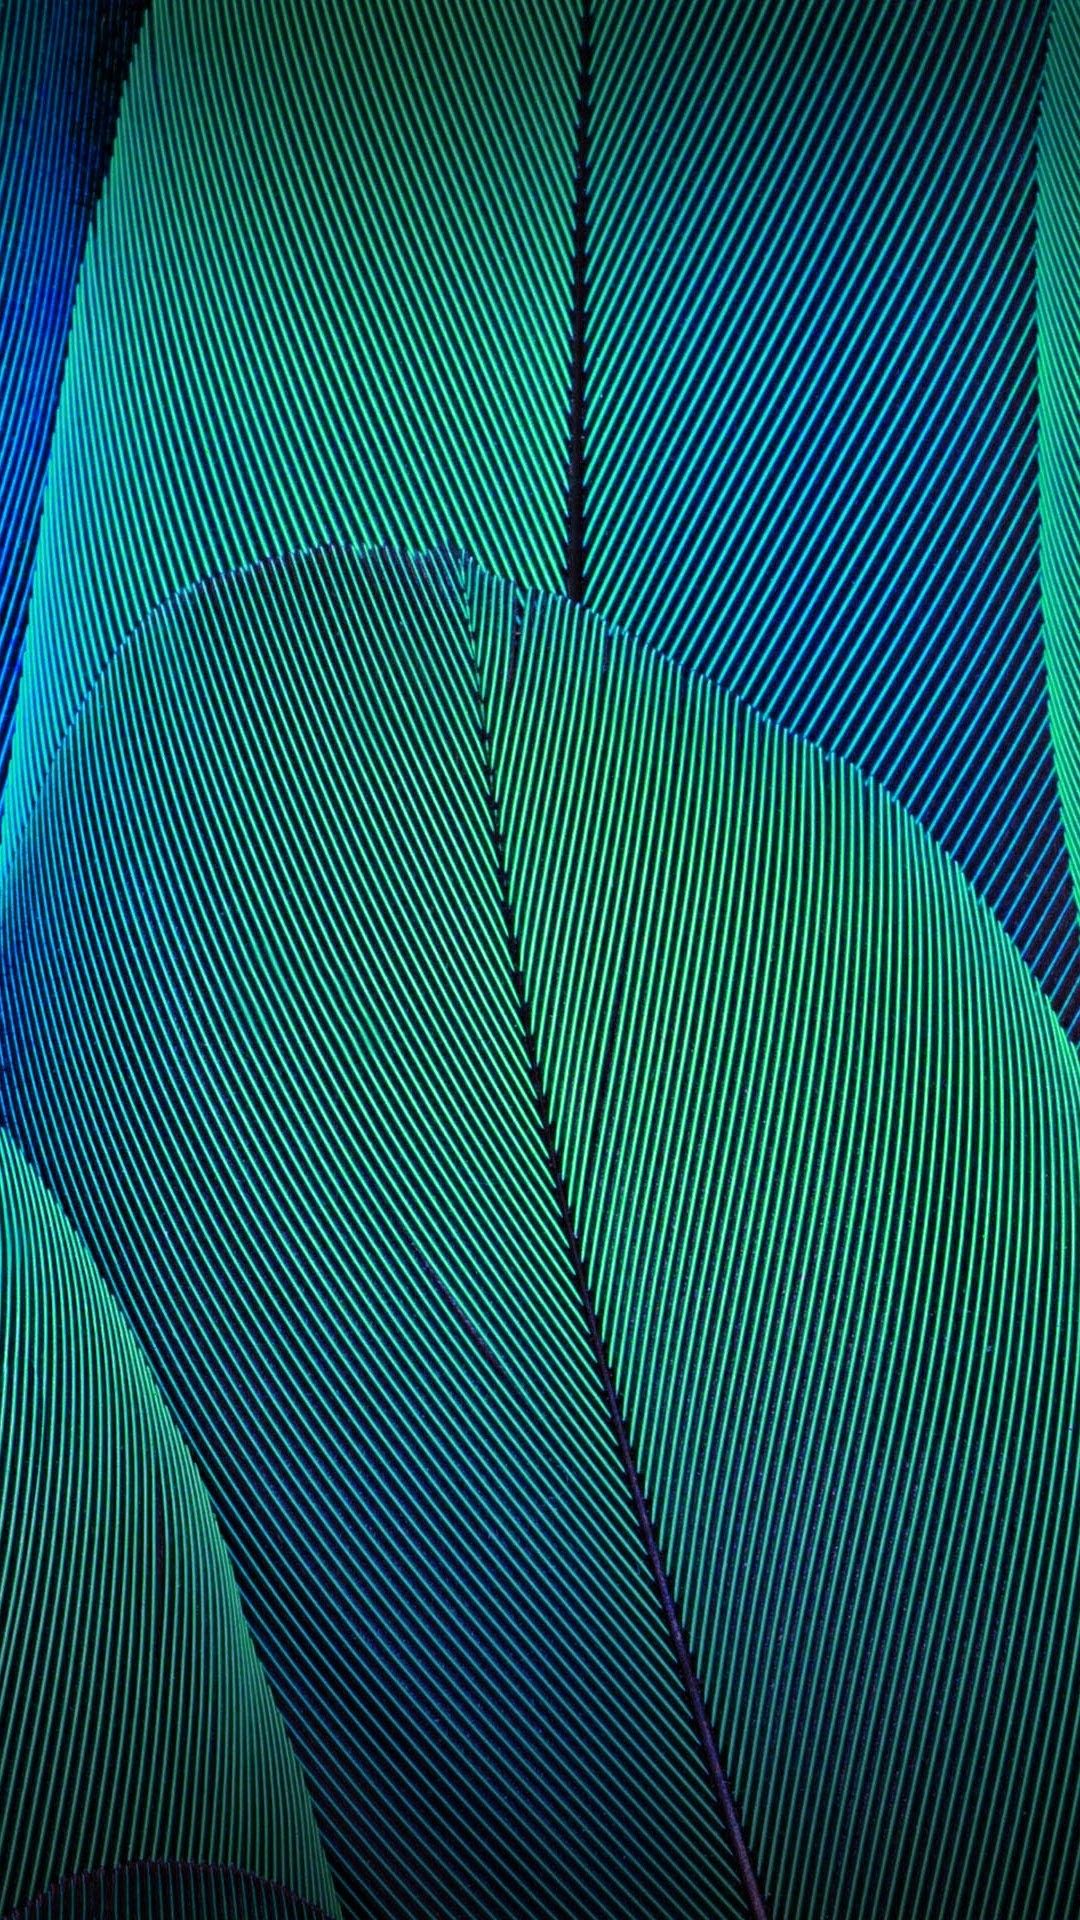 Wallpaper Leaves, Moto G5S Plus, Stock, HD, Abstract,. Wallpaper for iPhone, Android, Mobile and Desktop